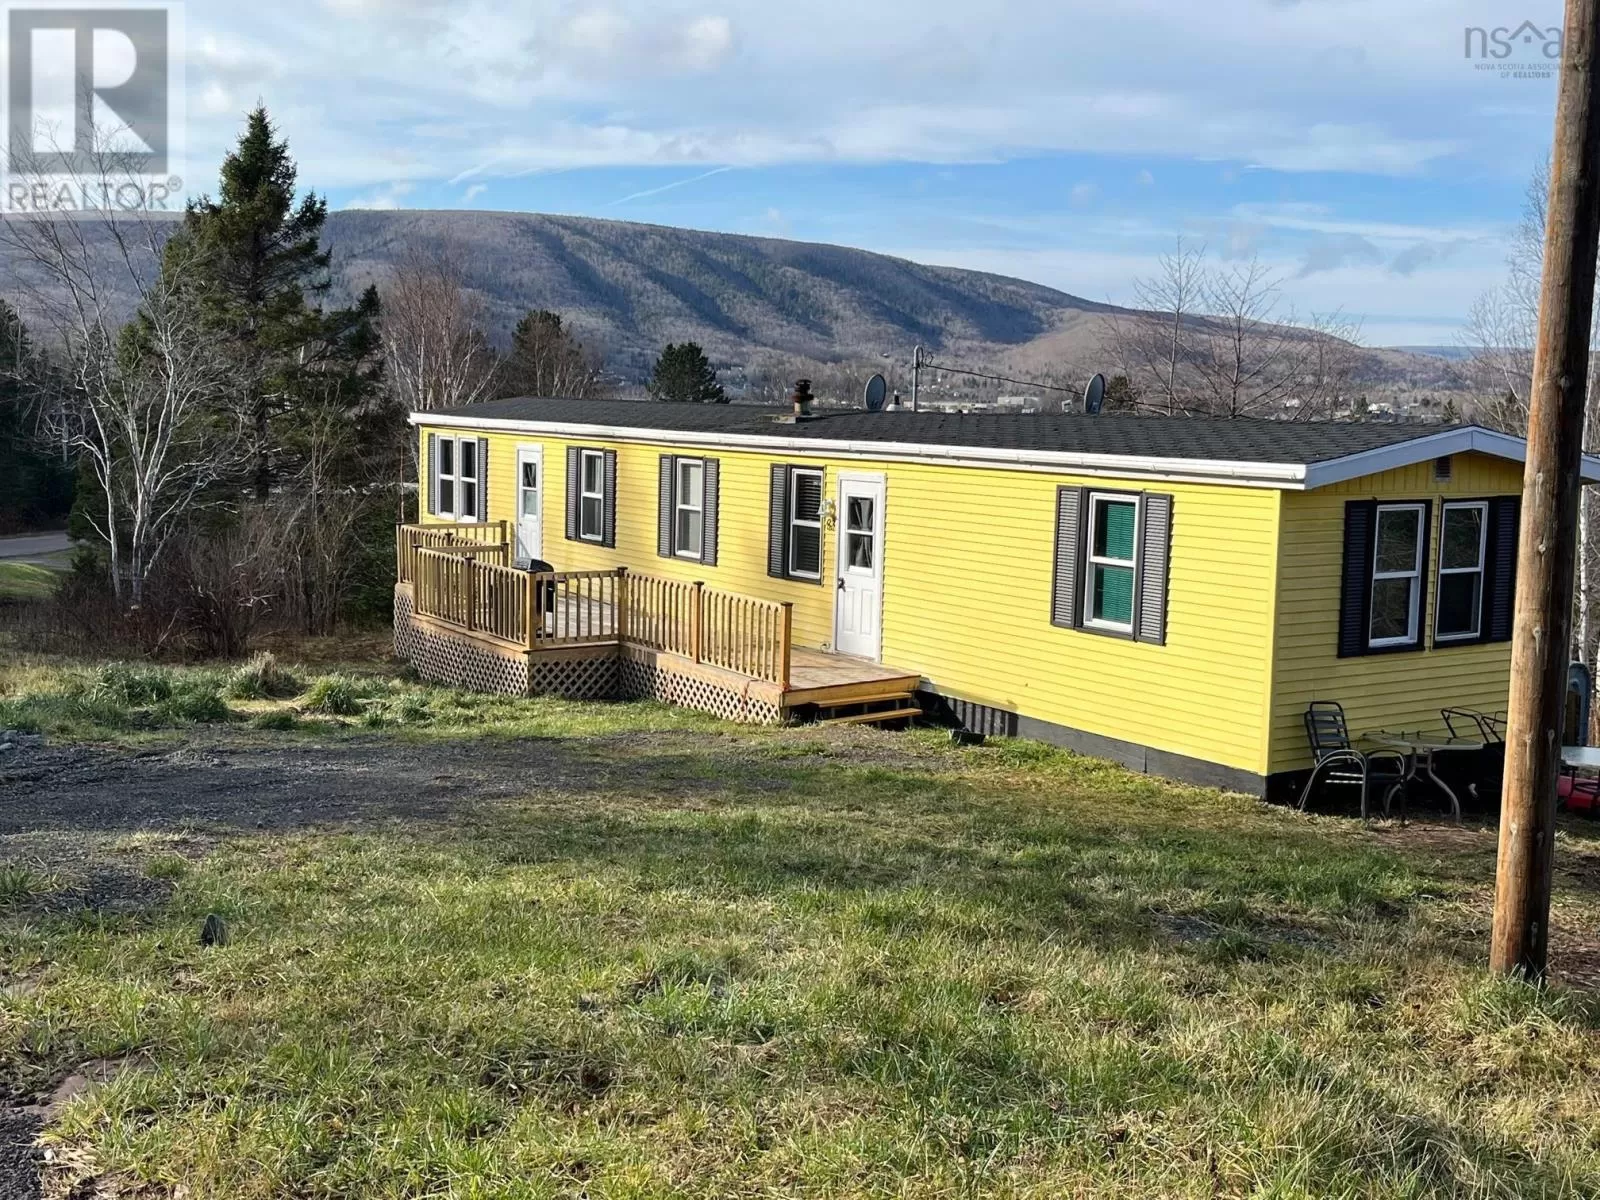 Mobile Home for rent: 83 Whycocomagh Mtn Road, Whycocomagh, Nova Scotia B0E 3M0